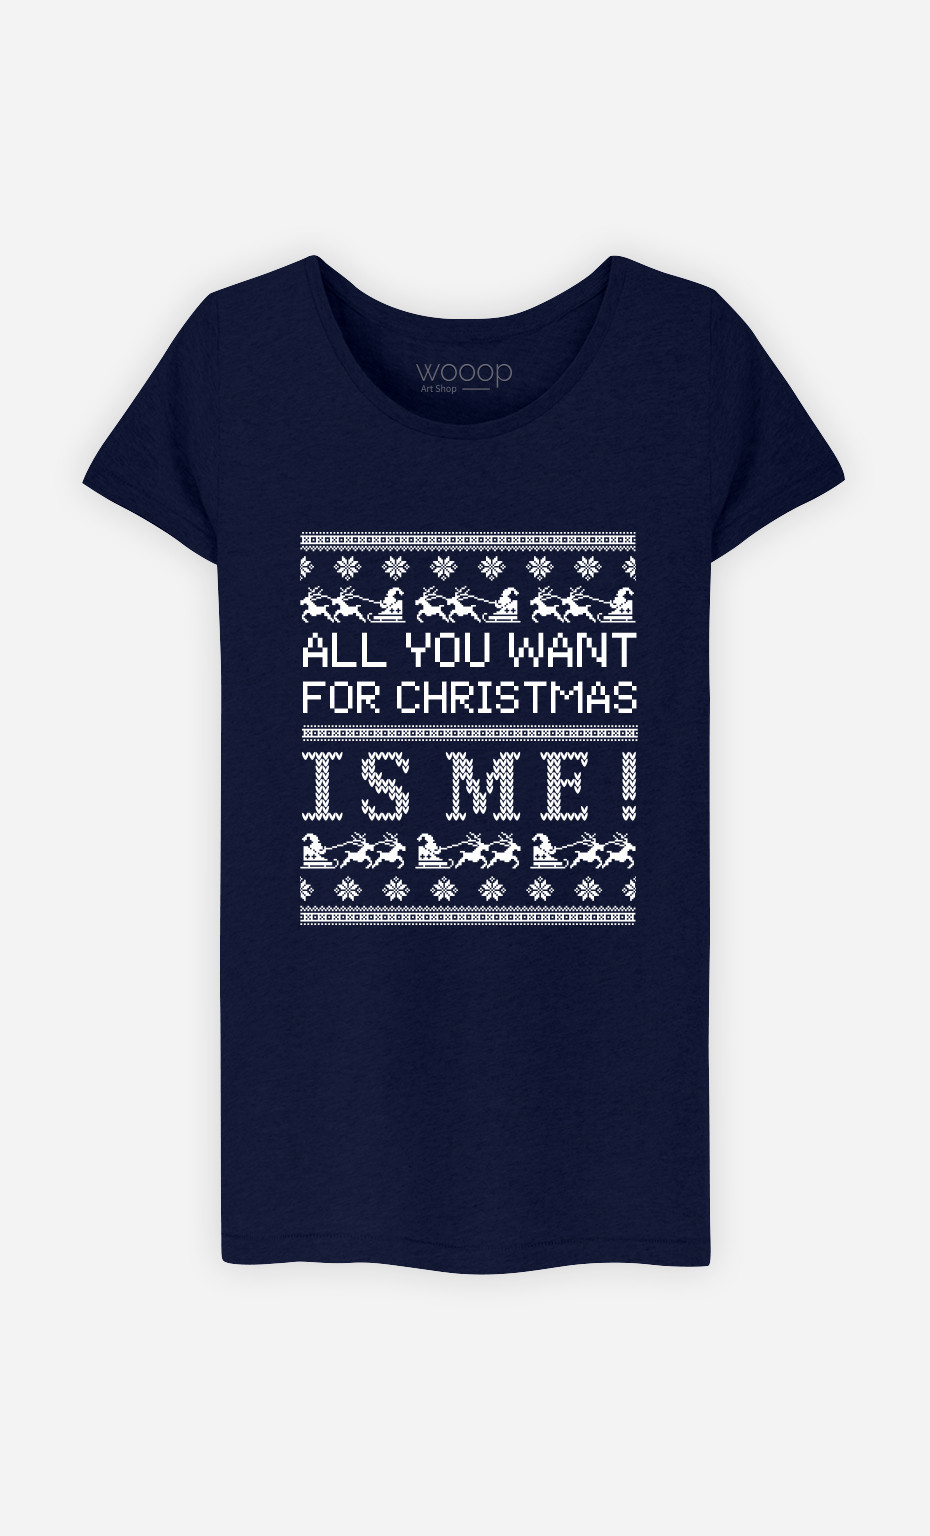 T-Shirt Woman All You Want Is Me